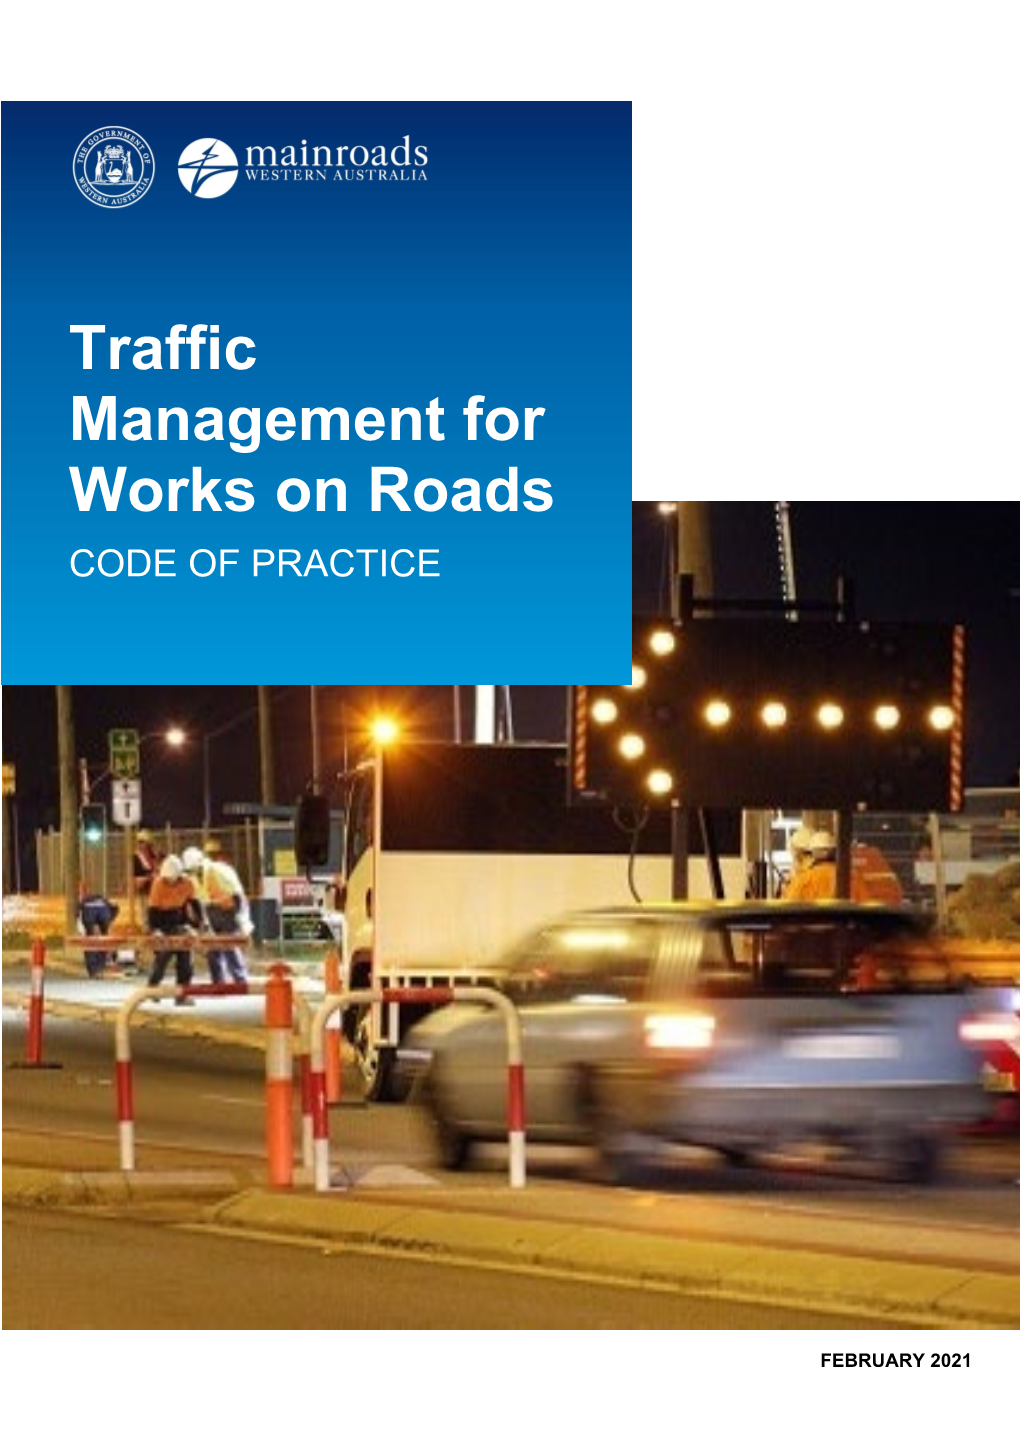 Traffic Management for Works on Roads Code of Practice